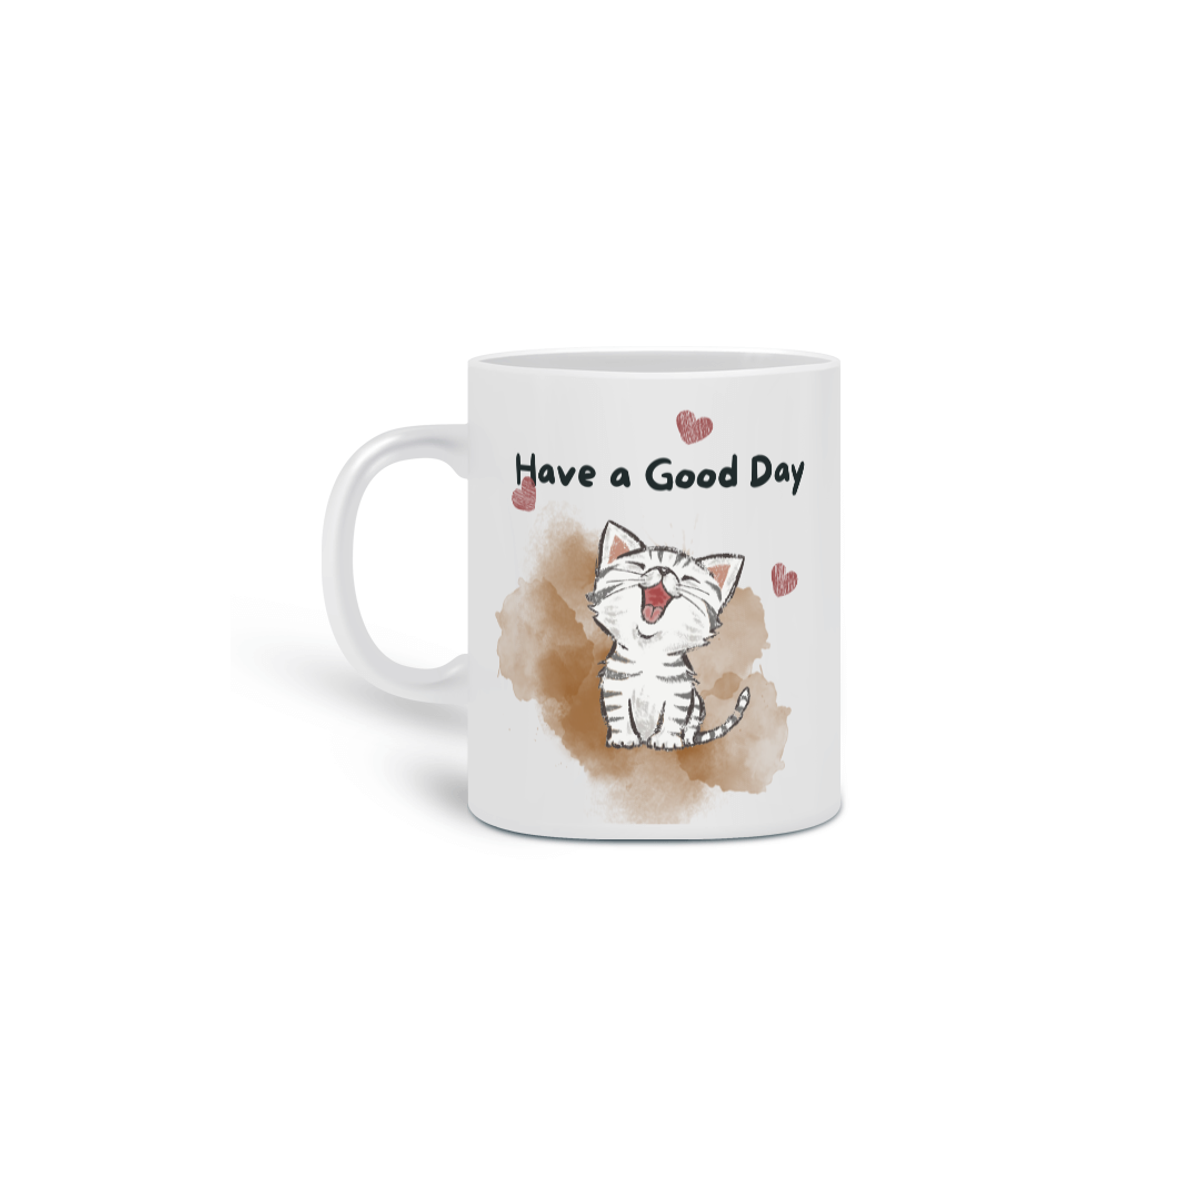 Nome do produto: Have a good Day - Kitty Cat